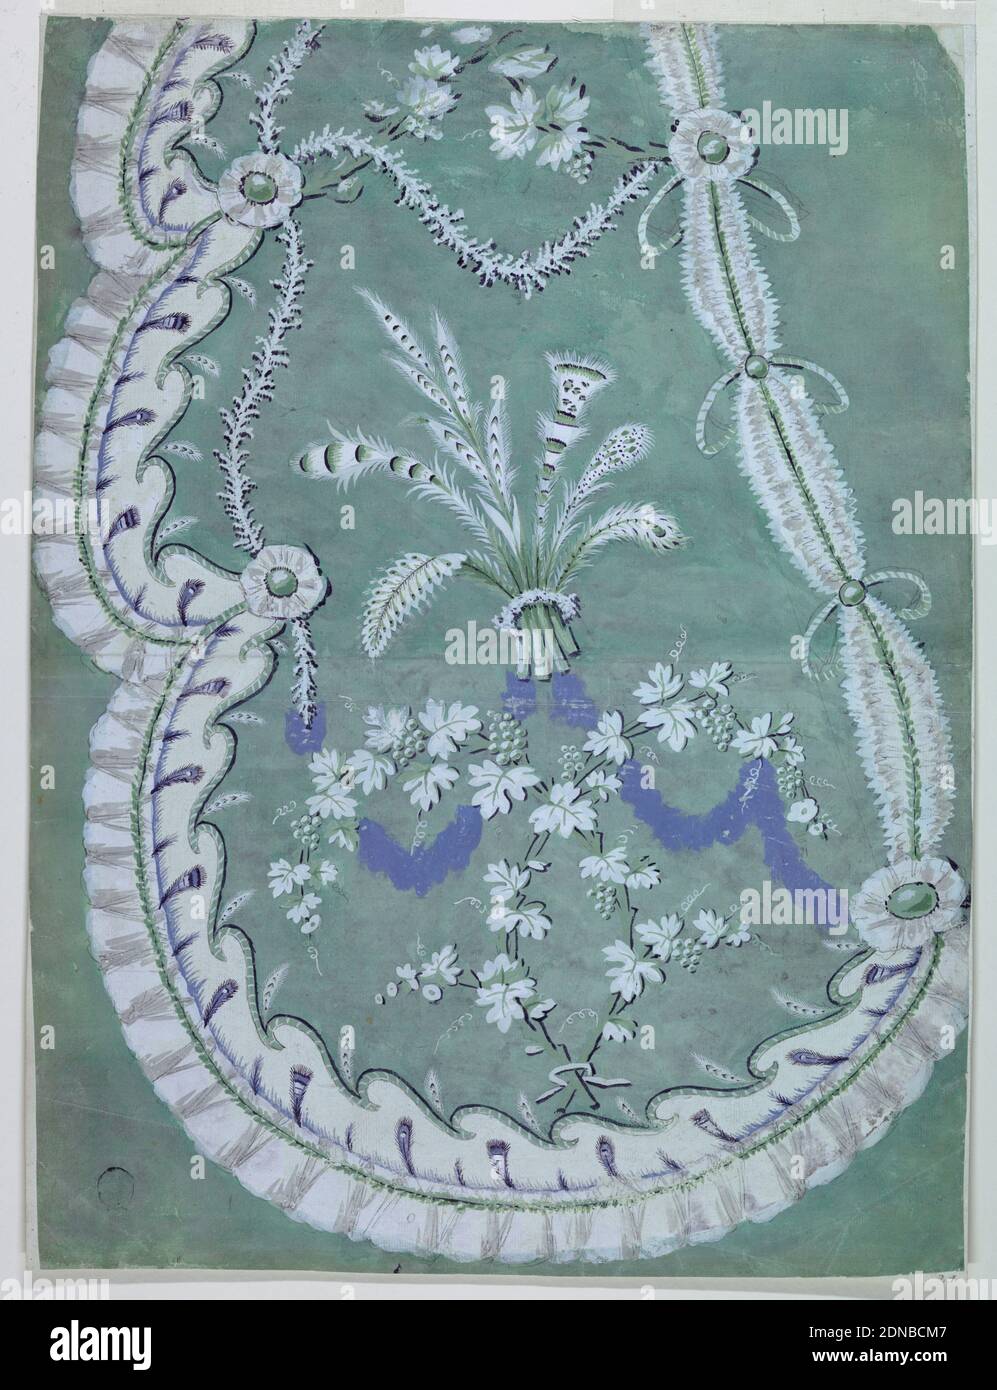 Design for a Feather Skirt, Graphite, brush and olive green, lilac, gray, white, and blue gouache on paper, Green fronds and green background. The decoration forms an elongated scallop, bordered at left and at the bottom by a white border with waved outline inside and decorated with plants and feathers and by a ruffle bordered at right by ruffled ovoids and a cord motif. The inner decoration consists of garlands, vine branches, and a fantastic spray., France, 1785–1790, Drawing Stock Photo